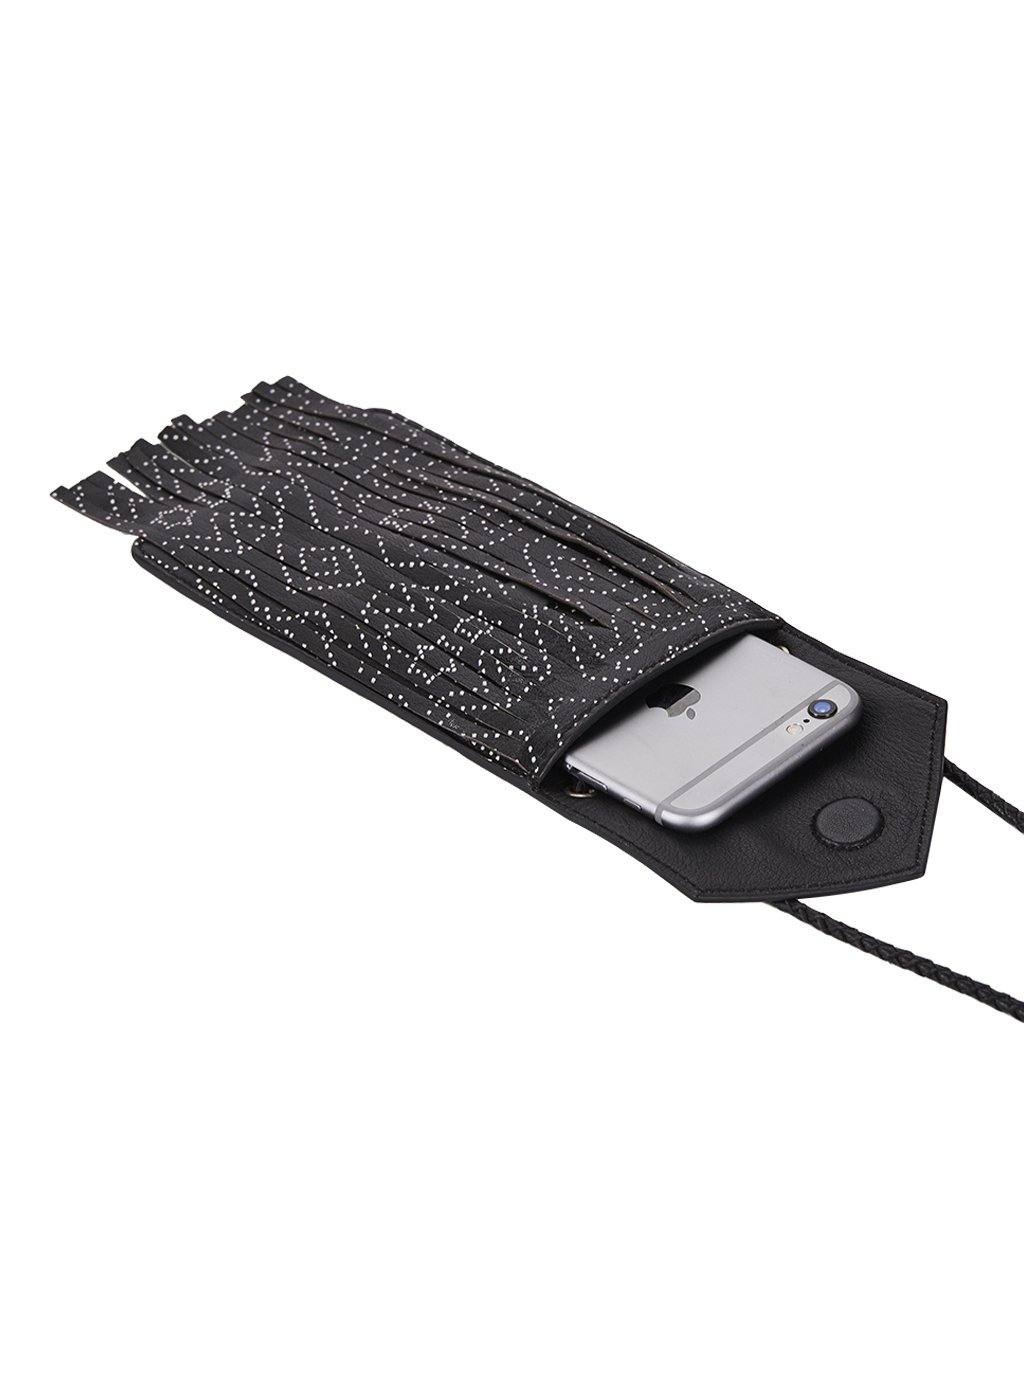 Tribal Mobile Pouch - Genes online store 2020